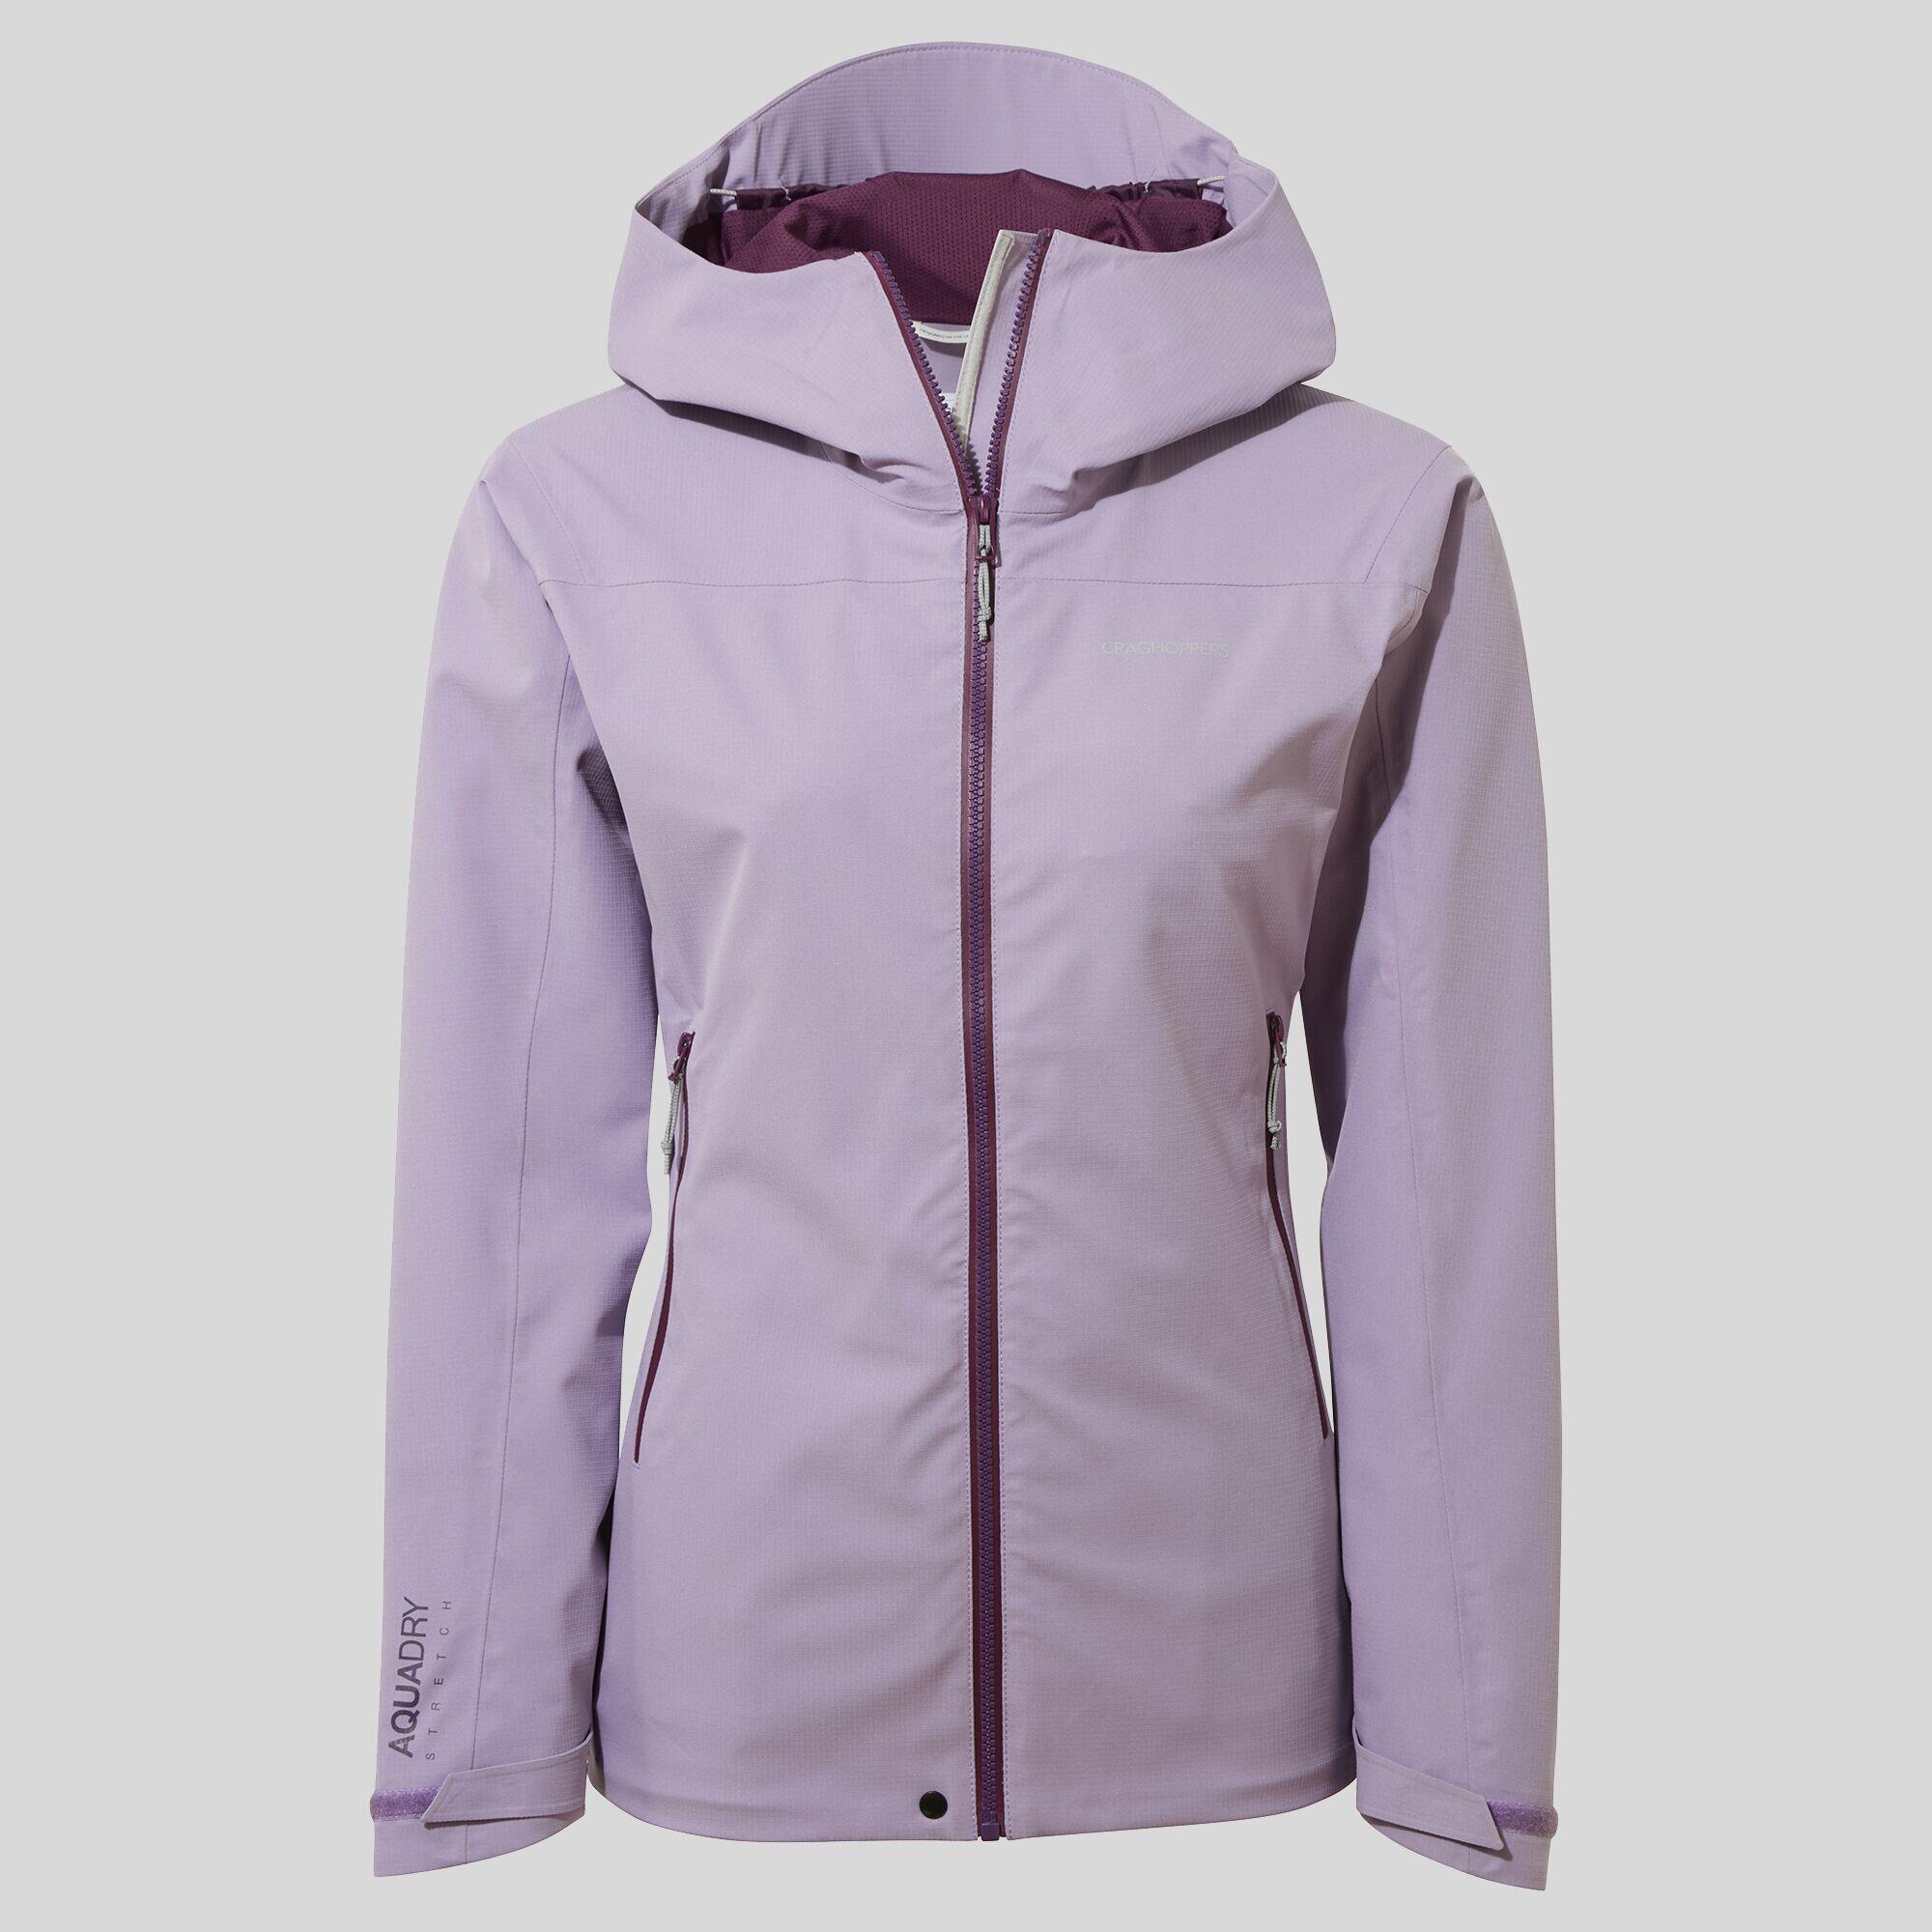 CRAGHOPPERS Womens Dynamic Pro Jacket